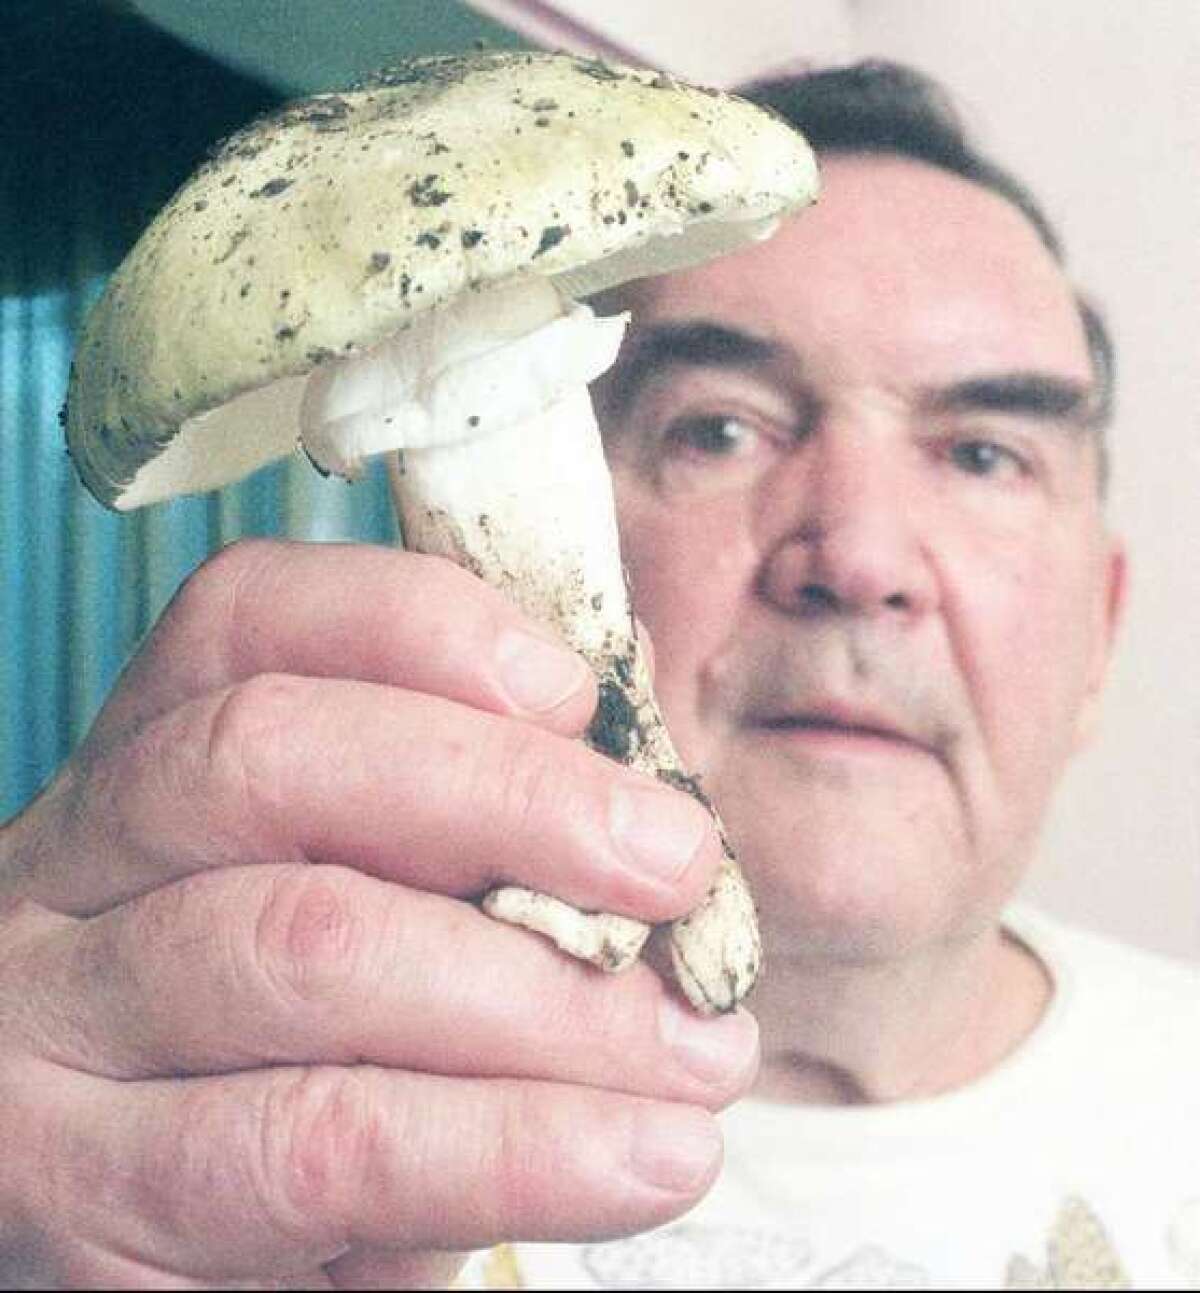 A mycological expert holds a death cap mushroom, a commonly found but poisonous mushroom in California